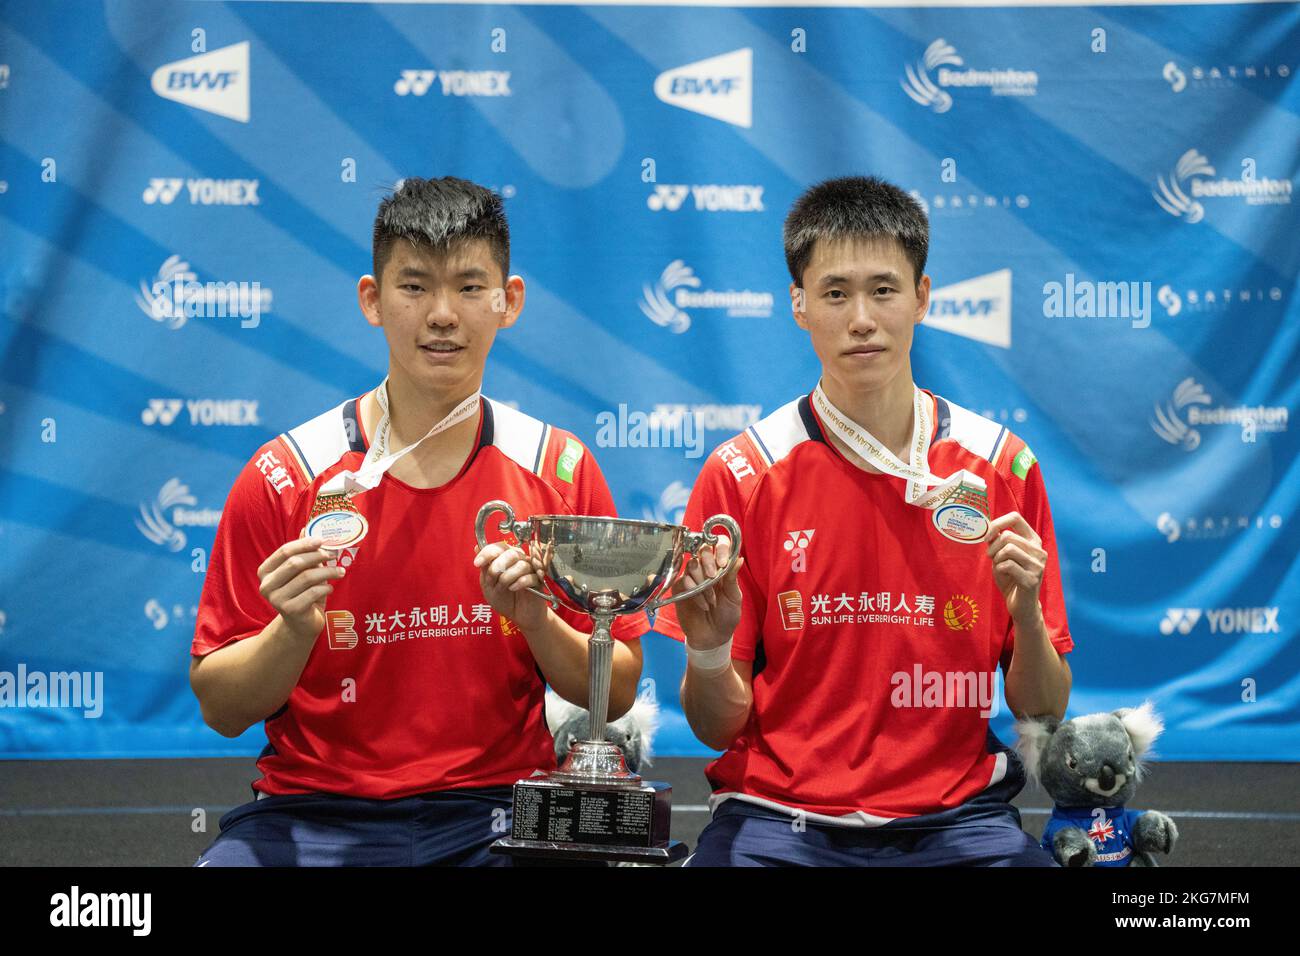 SYDNEY, AUSTRALIA - NOVEMBER 20: Liu Yu Chen and Ou Xuan Yi of China wins the mens doubles match between Ong and Teo of Malaysia and Liu and Ou of Chi Stock Photo